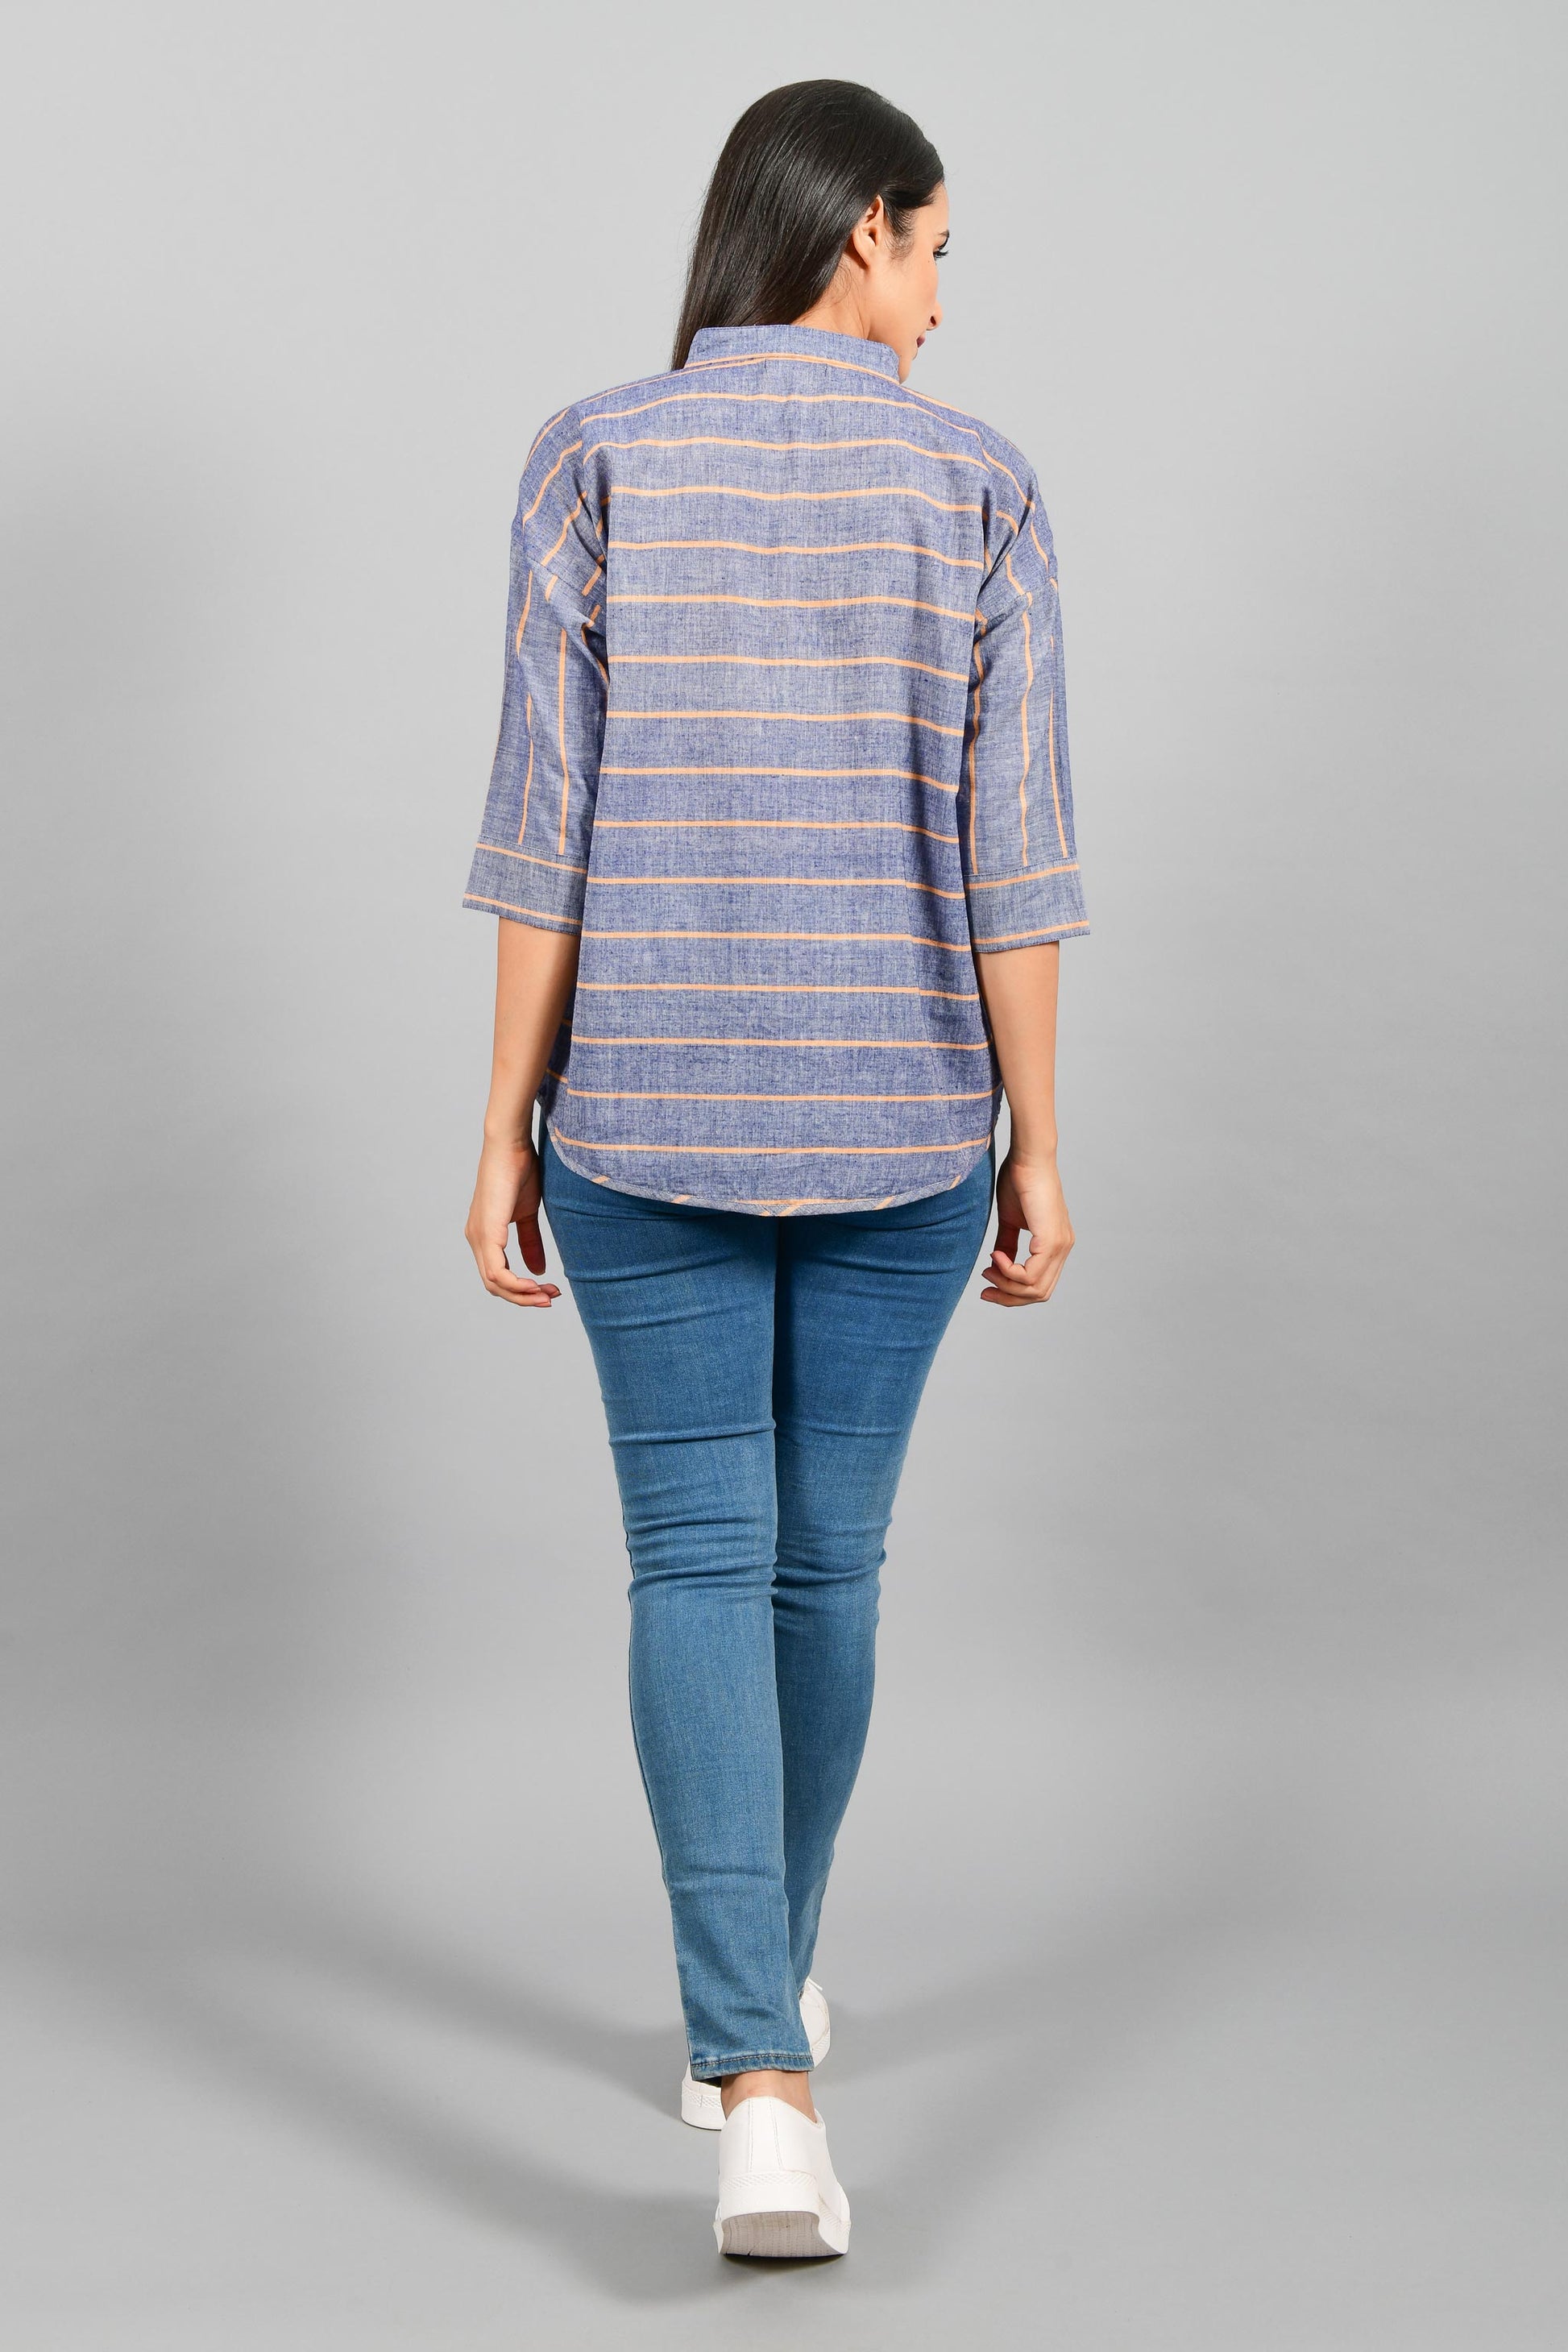 Back pose of an Indian female womenswear fashion model in a blue chambray with orange stripes handspun and handwoven khadi cotton free size top by Cotton Rack.